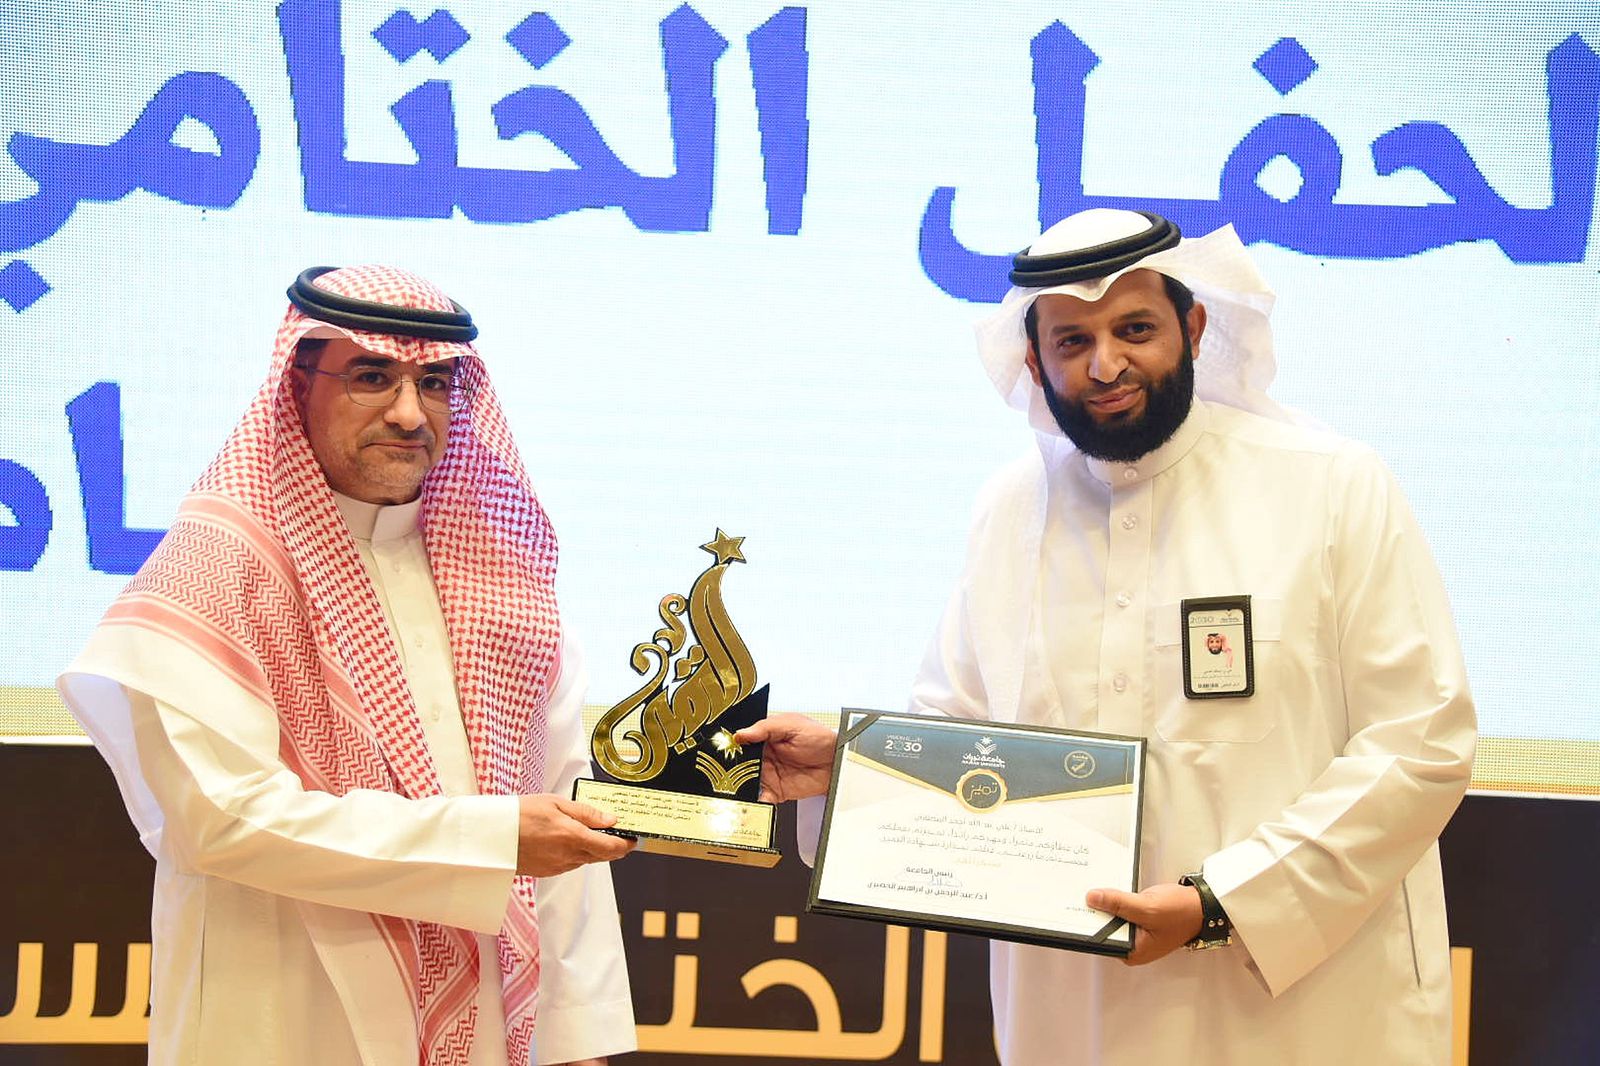 Honoring the Director of Administration for obtaining the Ideal Employee Award at the University